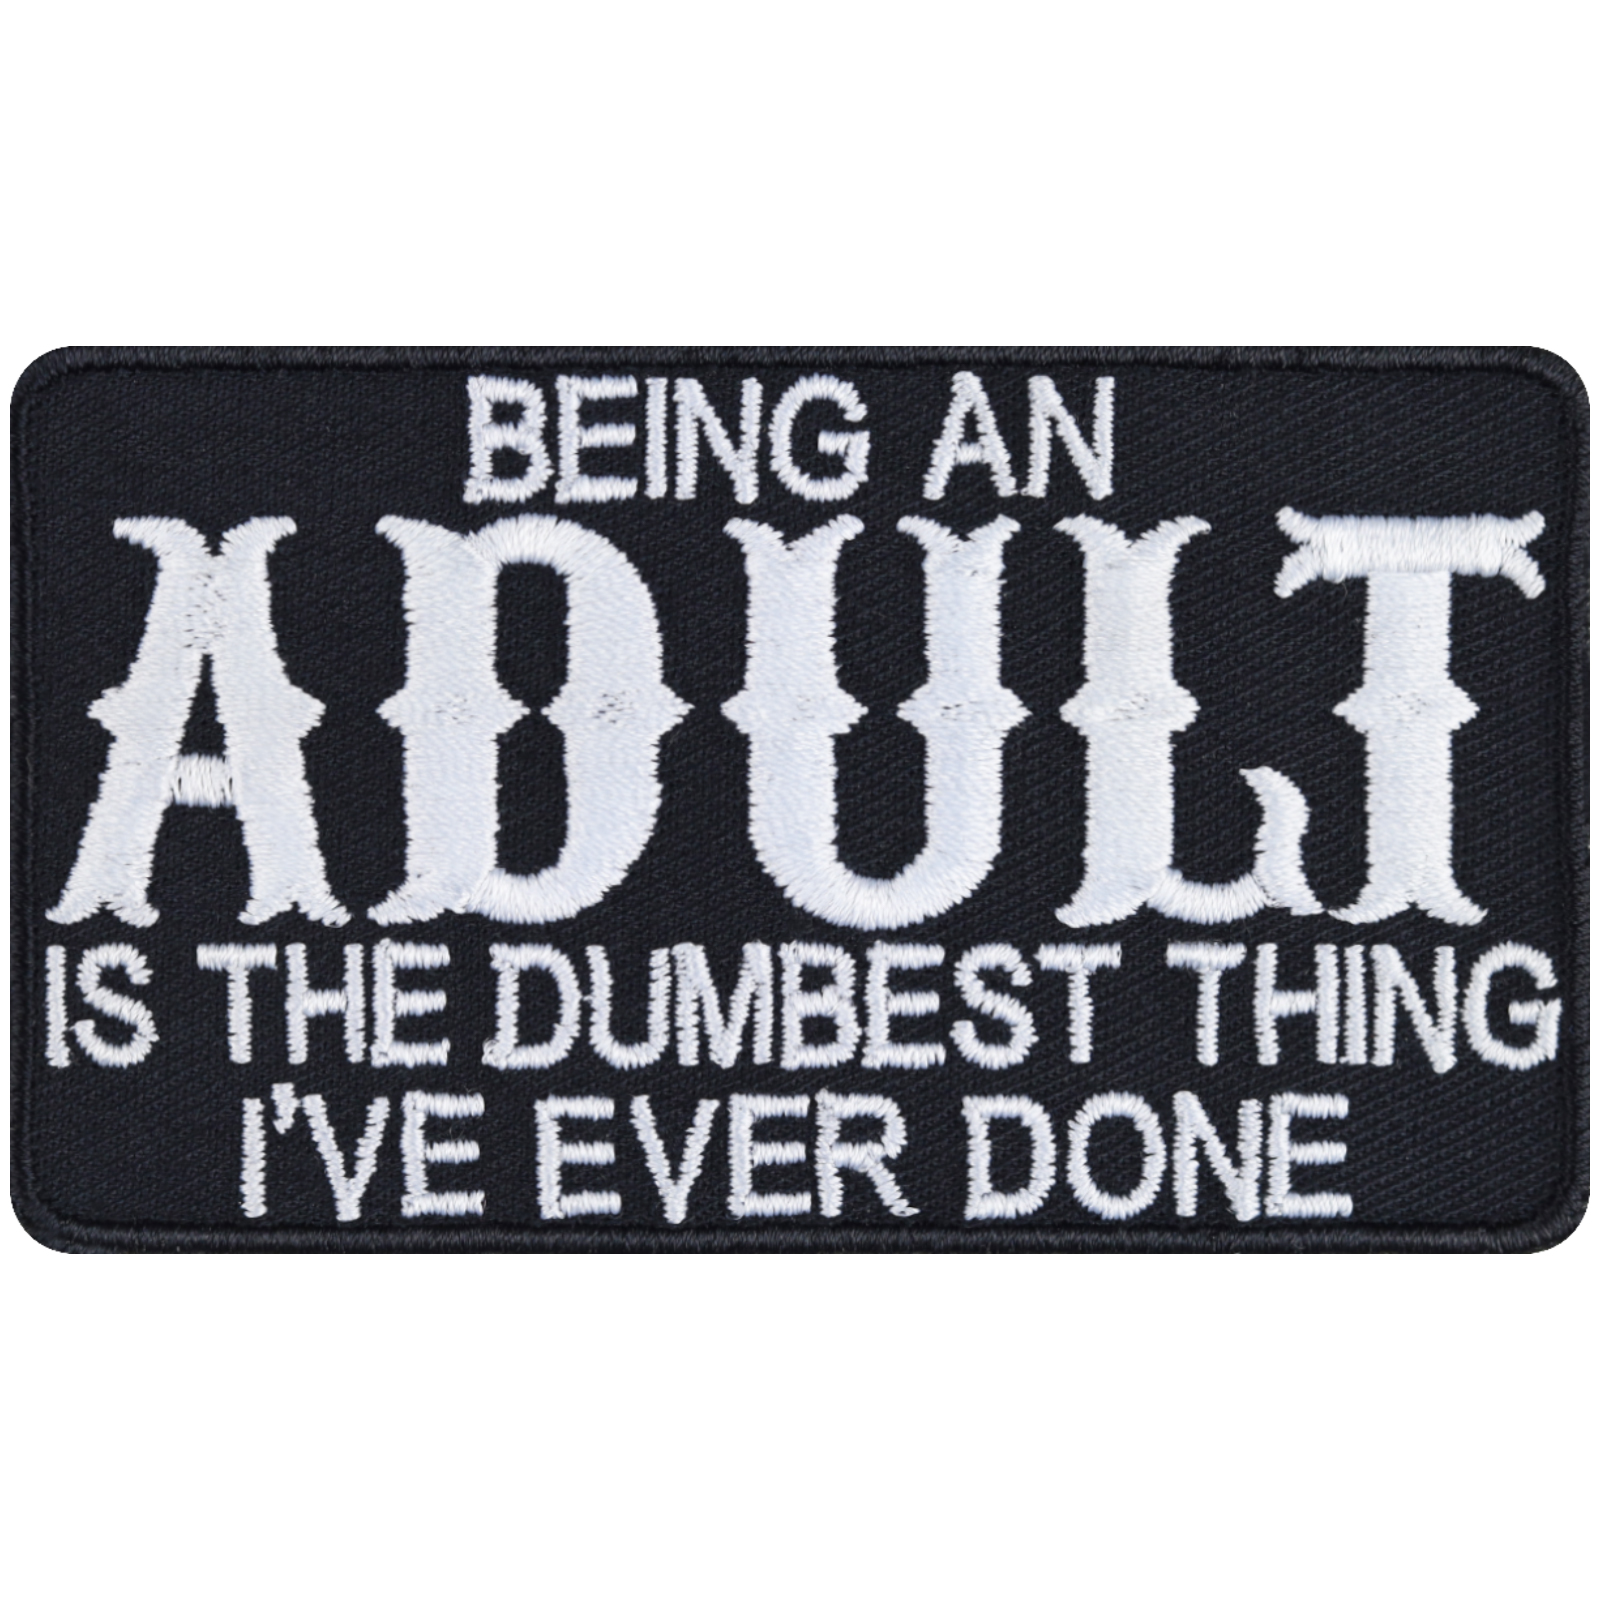 Being an adult is the dumbest thing I've ever done - Patch